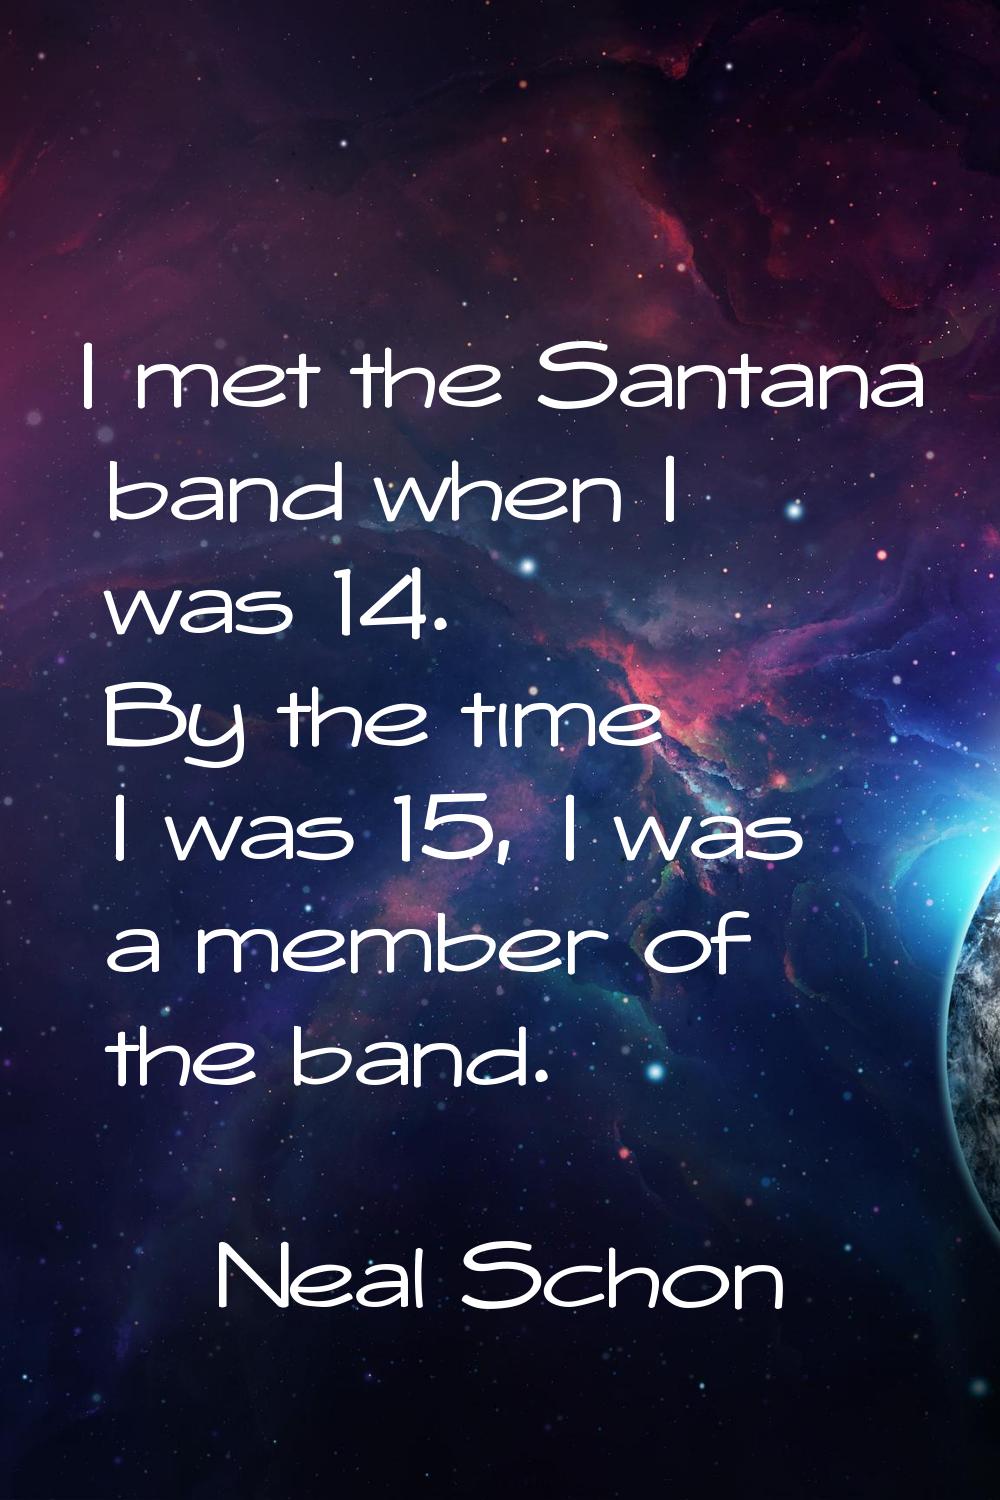 I met the Santana band when I was 14. By the time I was 15, I was a member of the band.